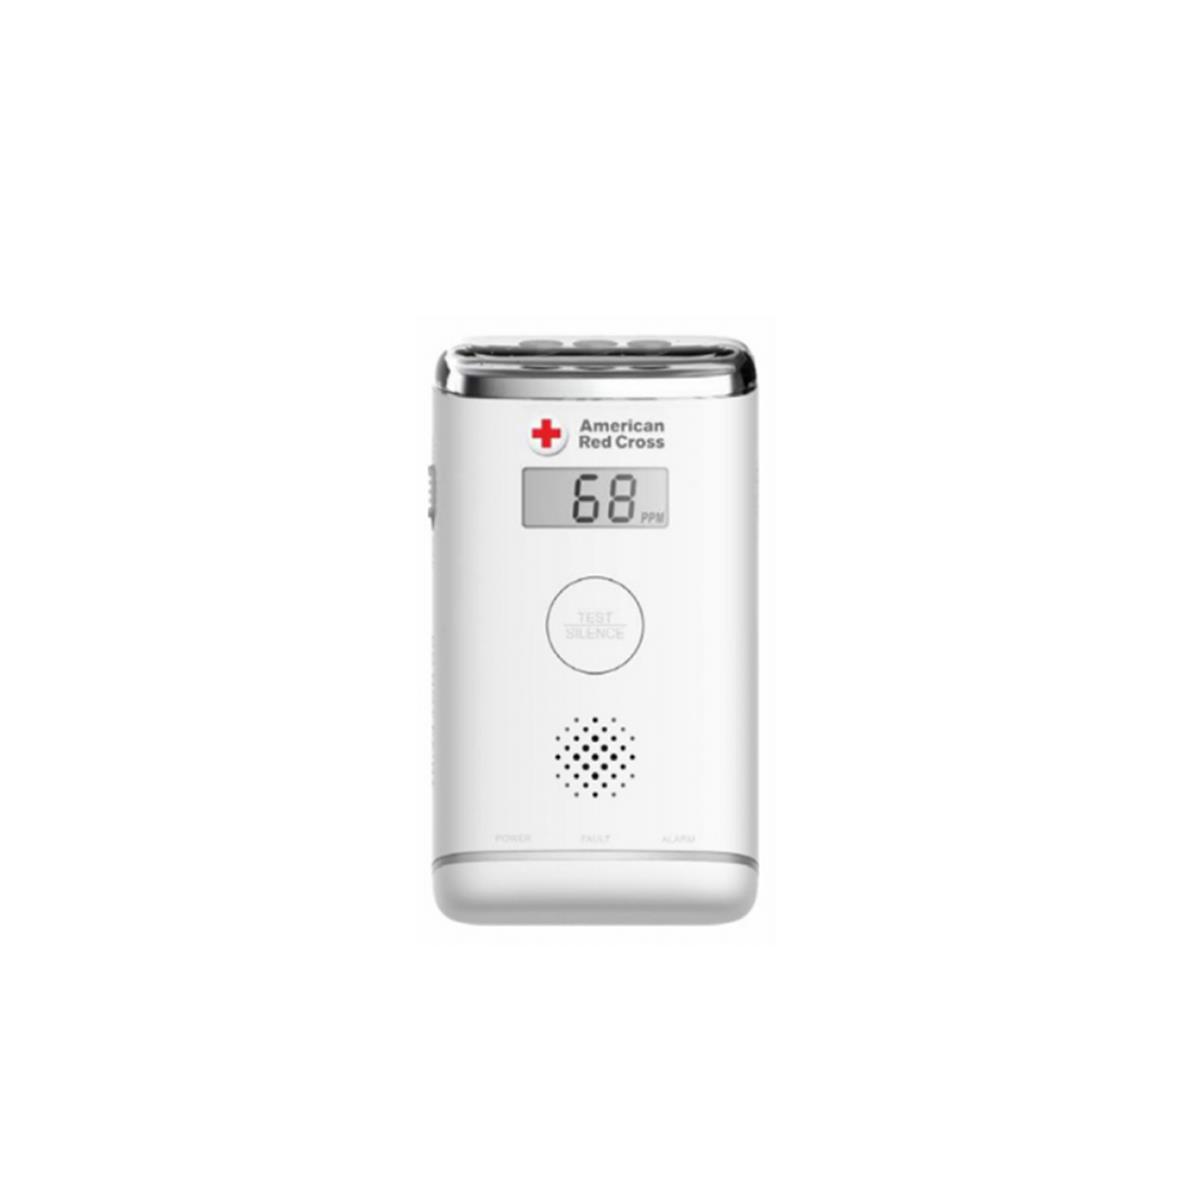 Image of Eton American Red Cross Blackout Buddy Carbon Monoxide Detector with Flashlight